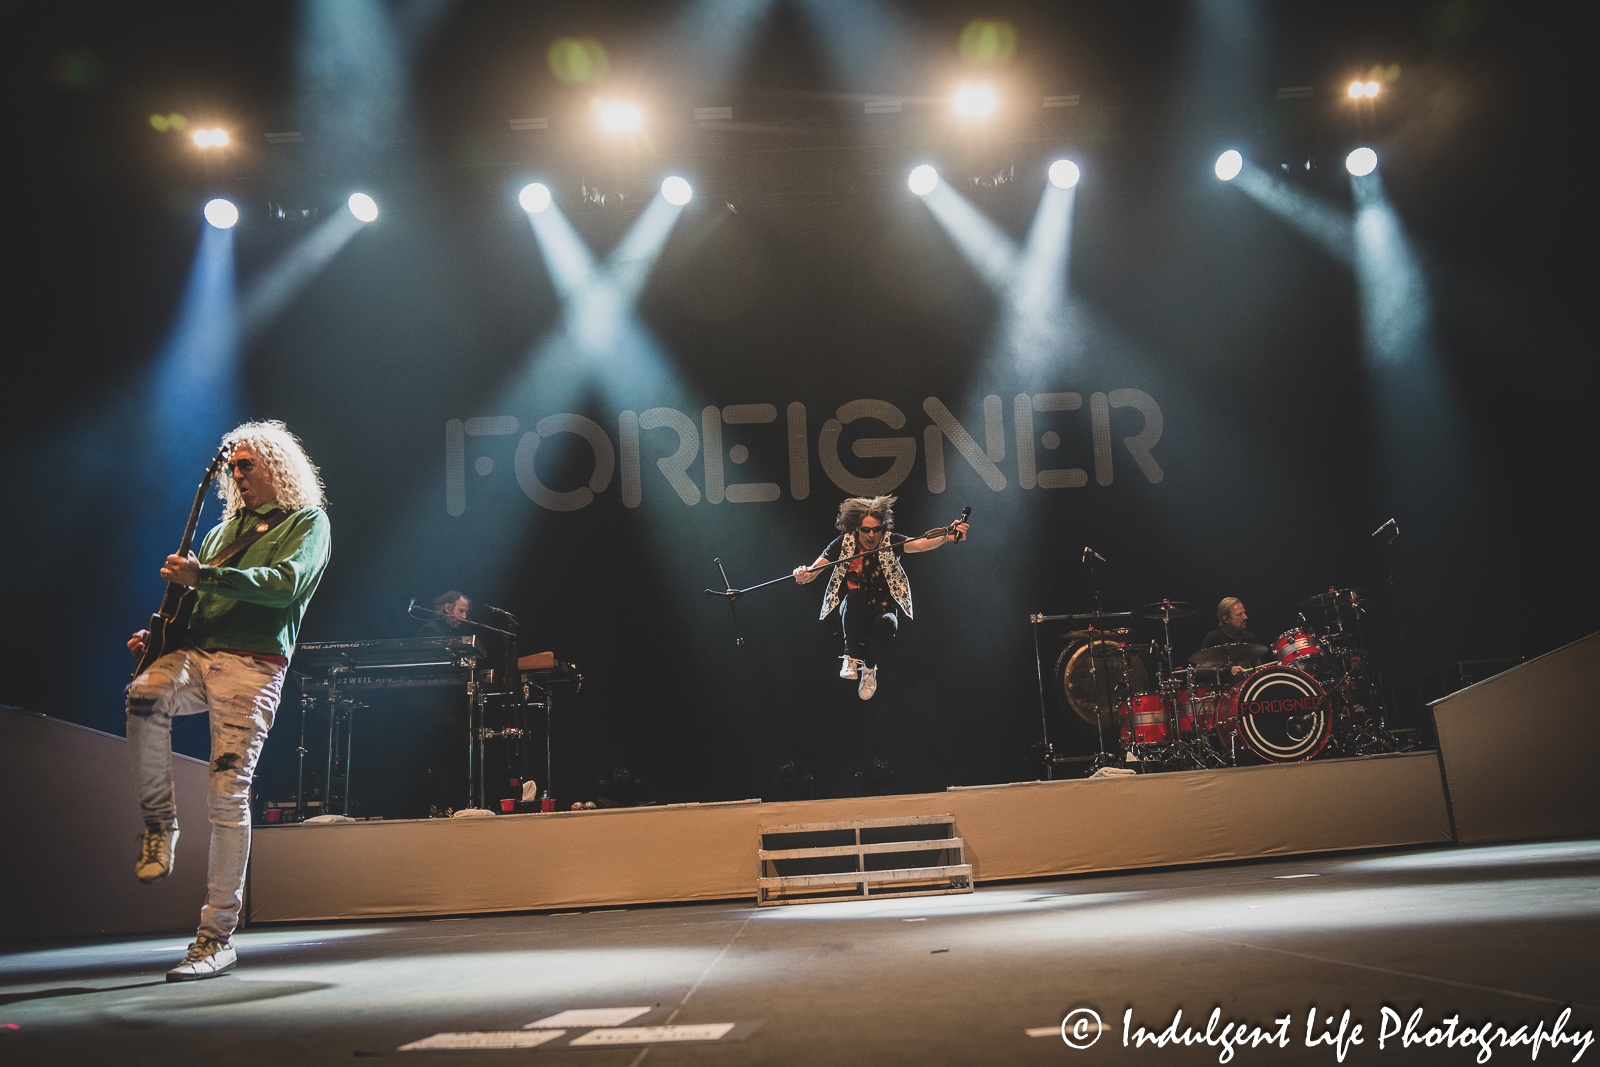 Foreigner opening its show at Hartman Arena in Park City, KS on April 30, 2023.